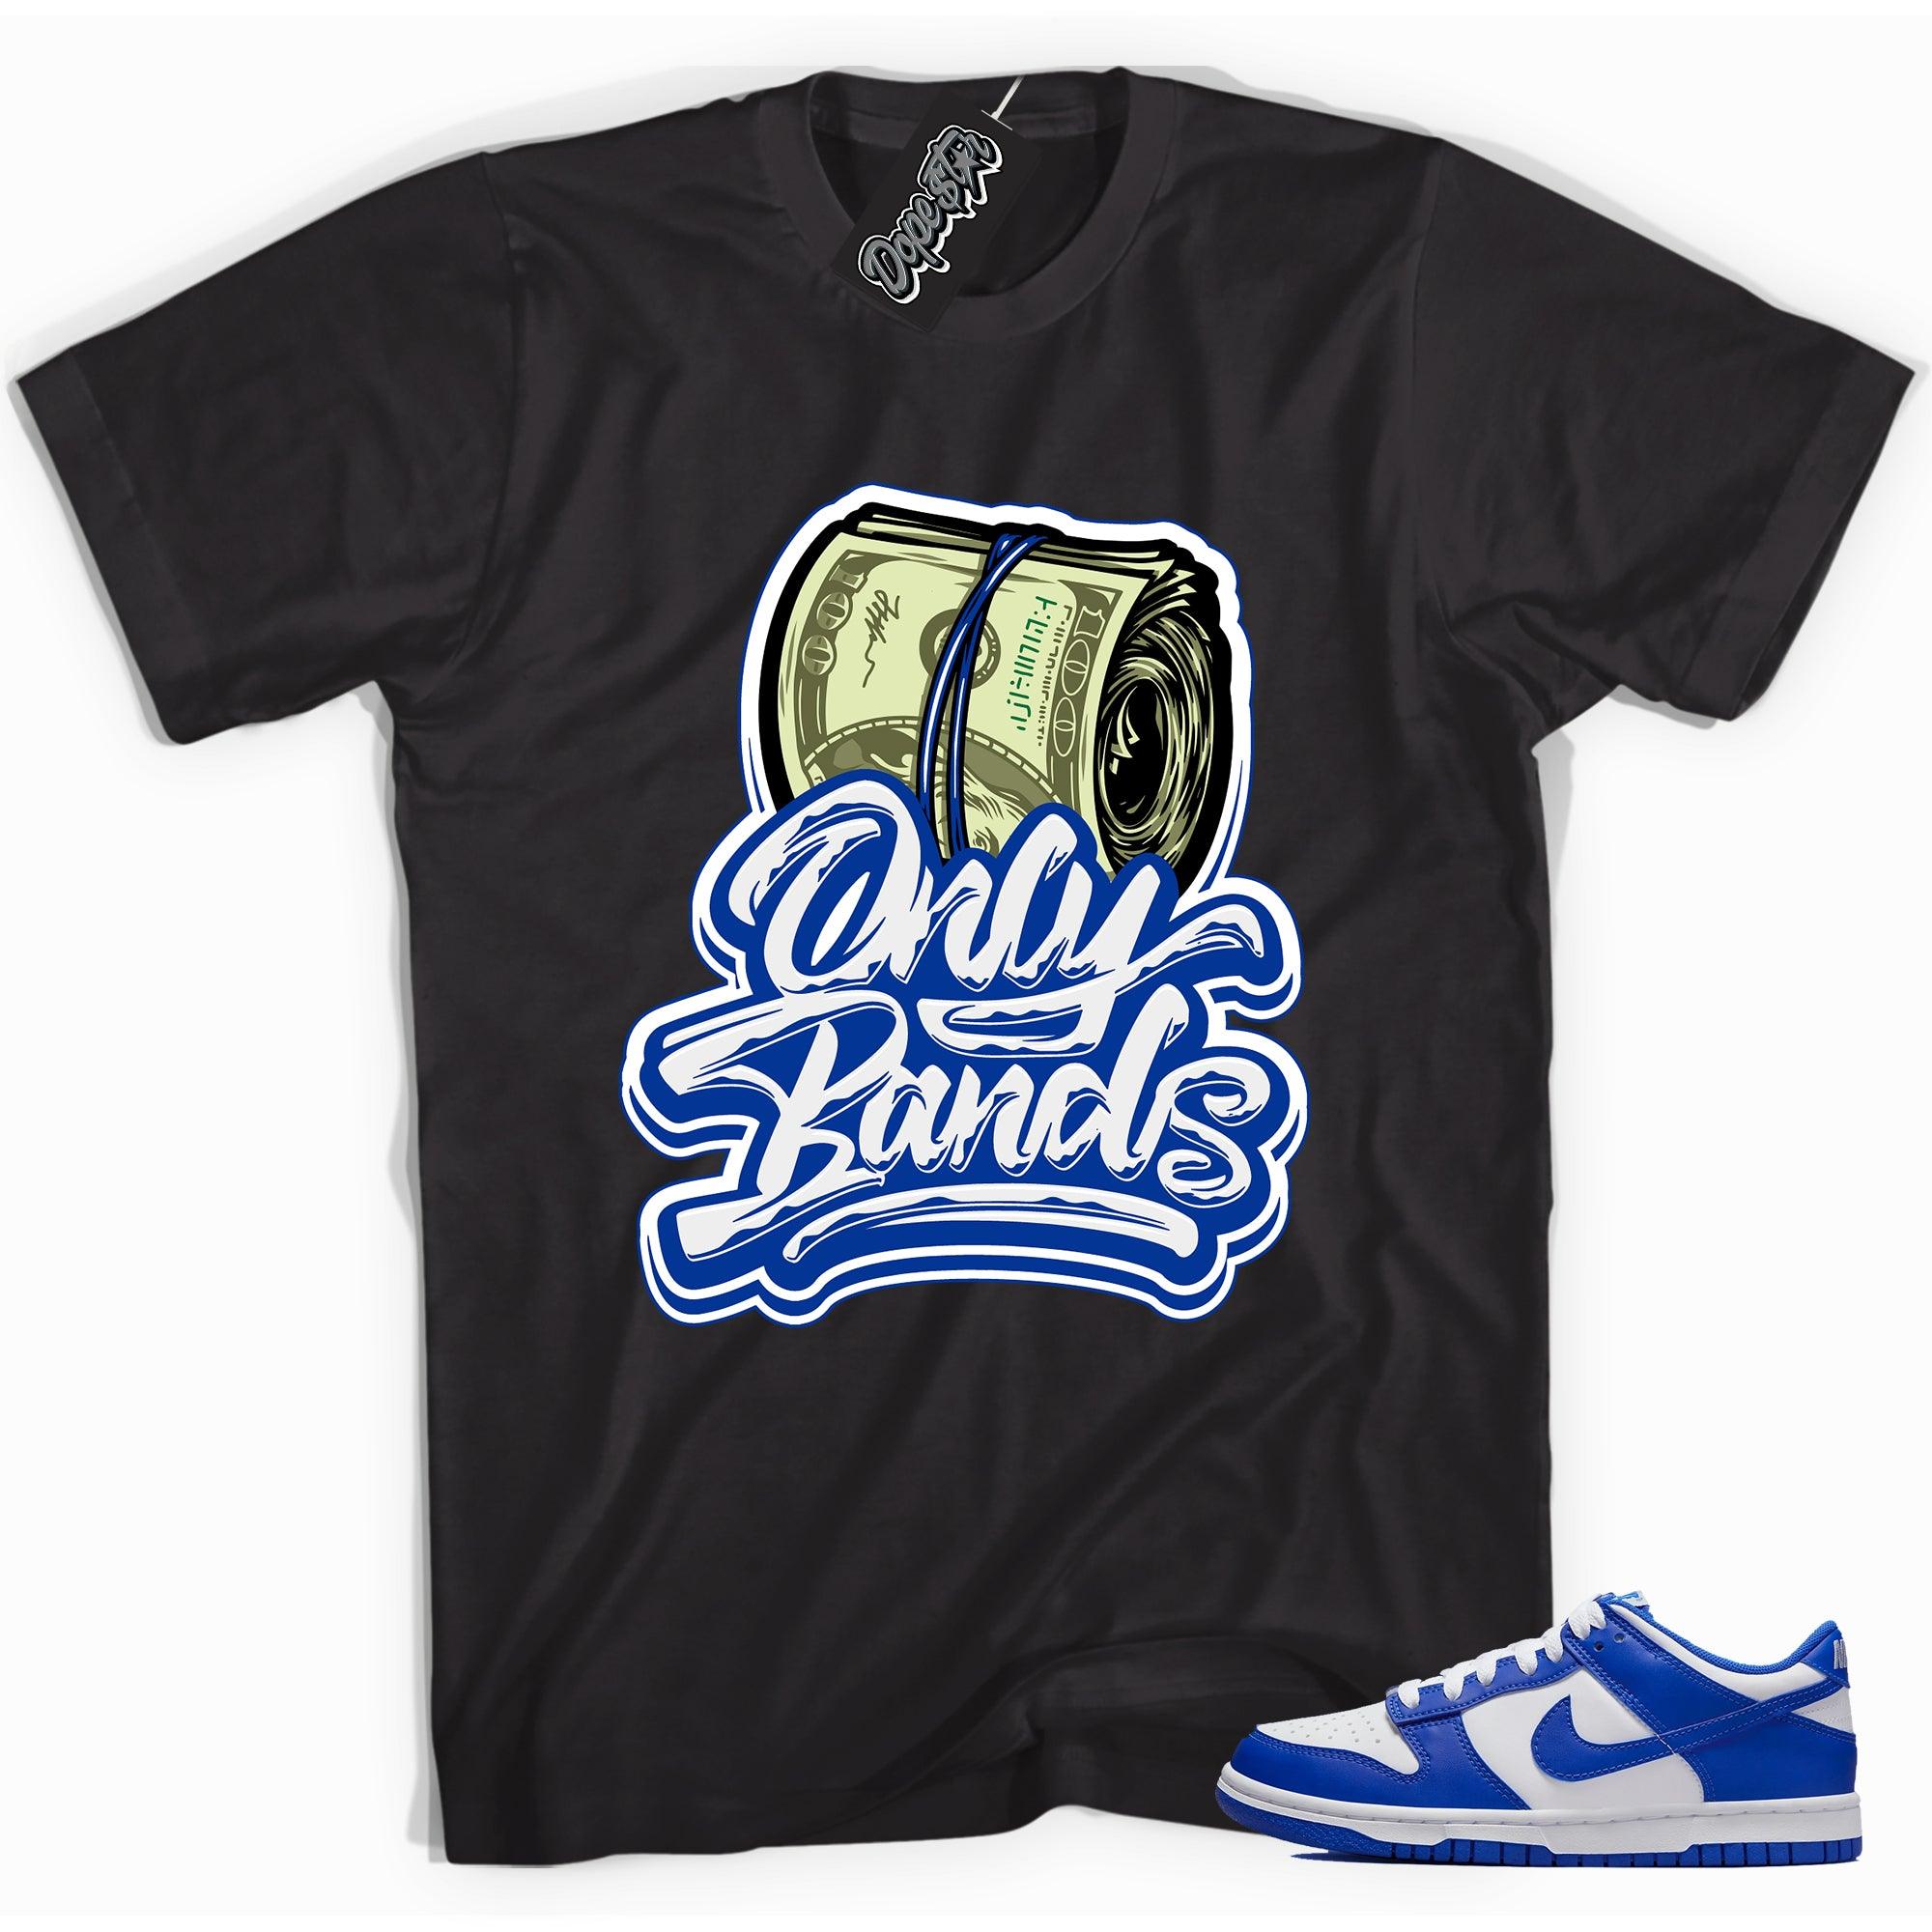 Cool black graphic tee with 'Only Bands' print, that perfectly matches Nike Dunk Low Racer Blue sneakers